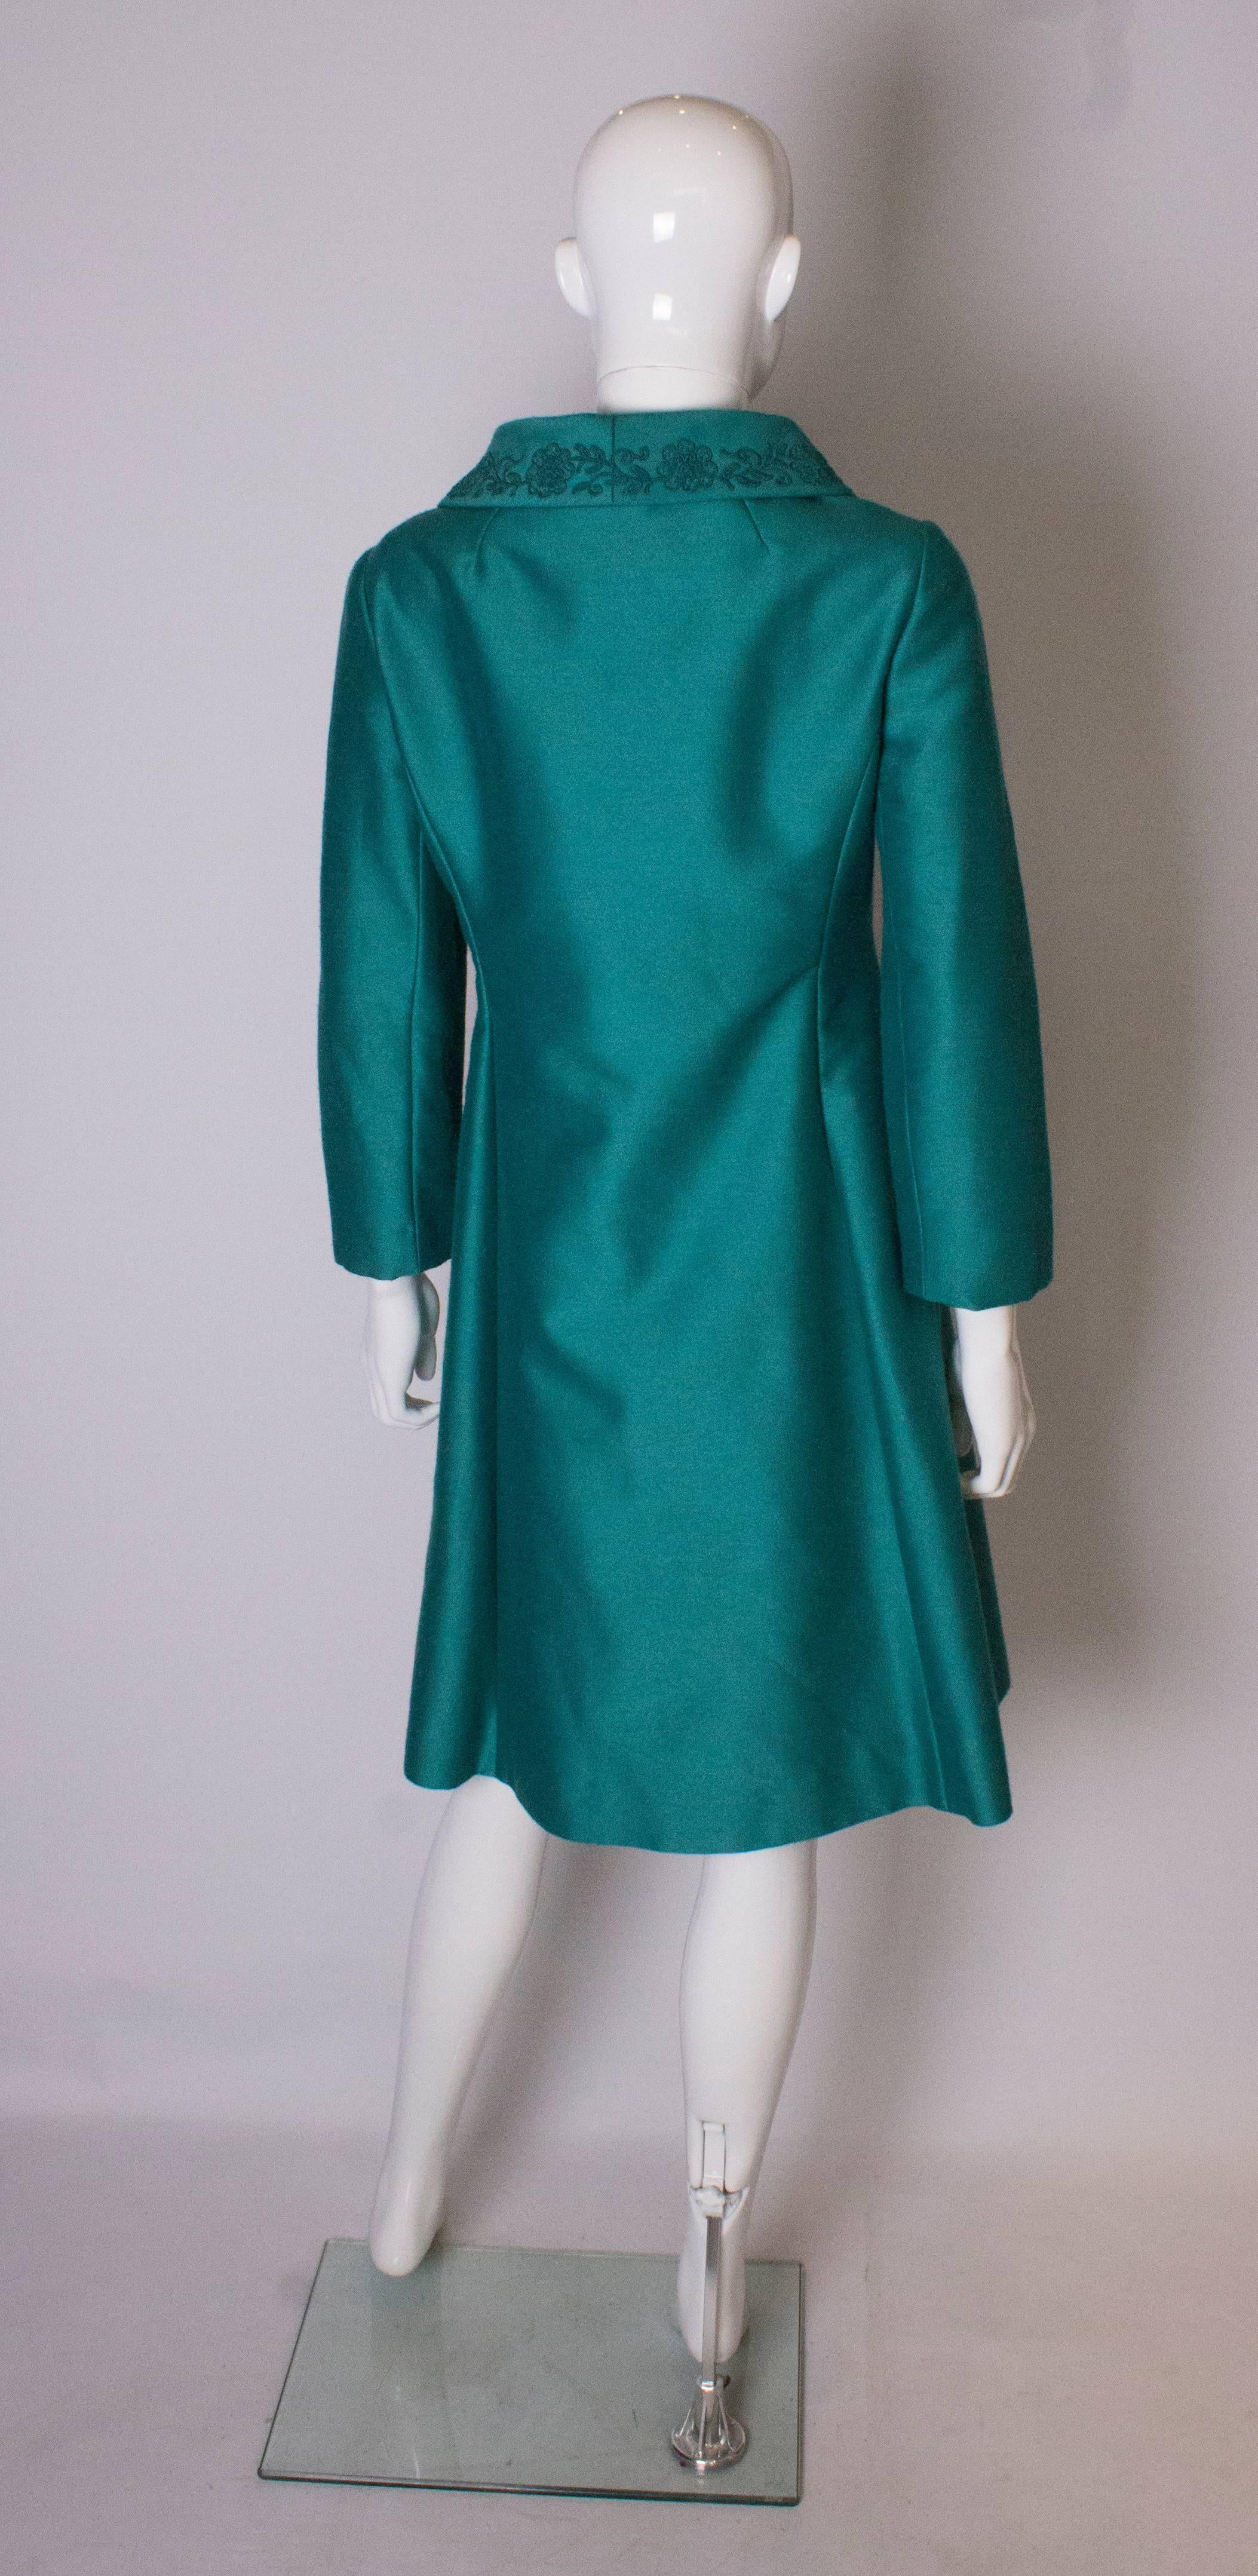 Women's A Vintage 1960s Teal Coloured Evening Coat For Sale